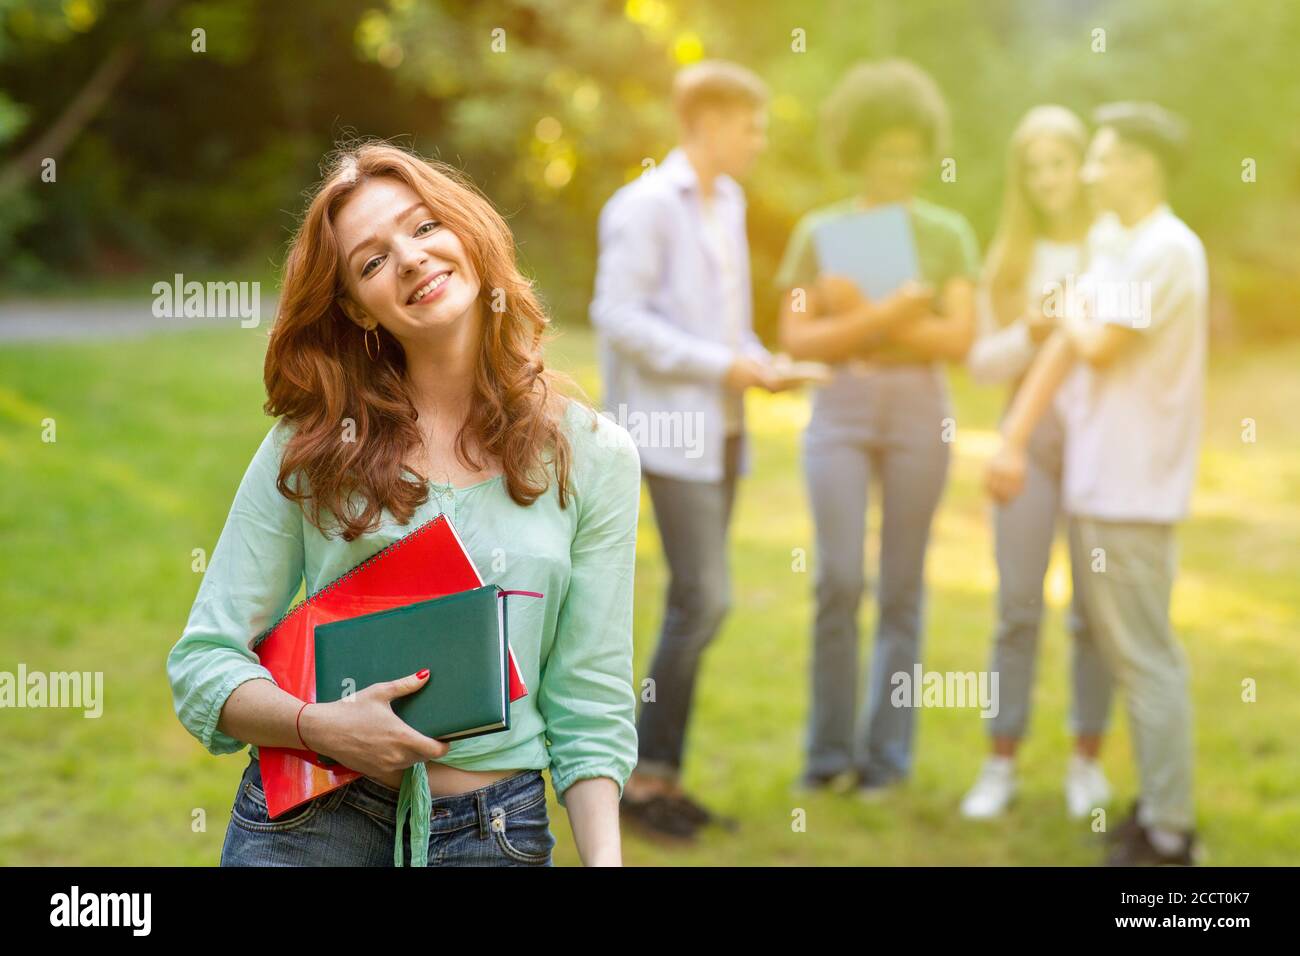 Cute student girl with workbooks posing outdoors with her classmates on background Stock Photo